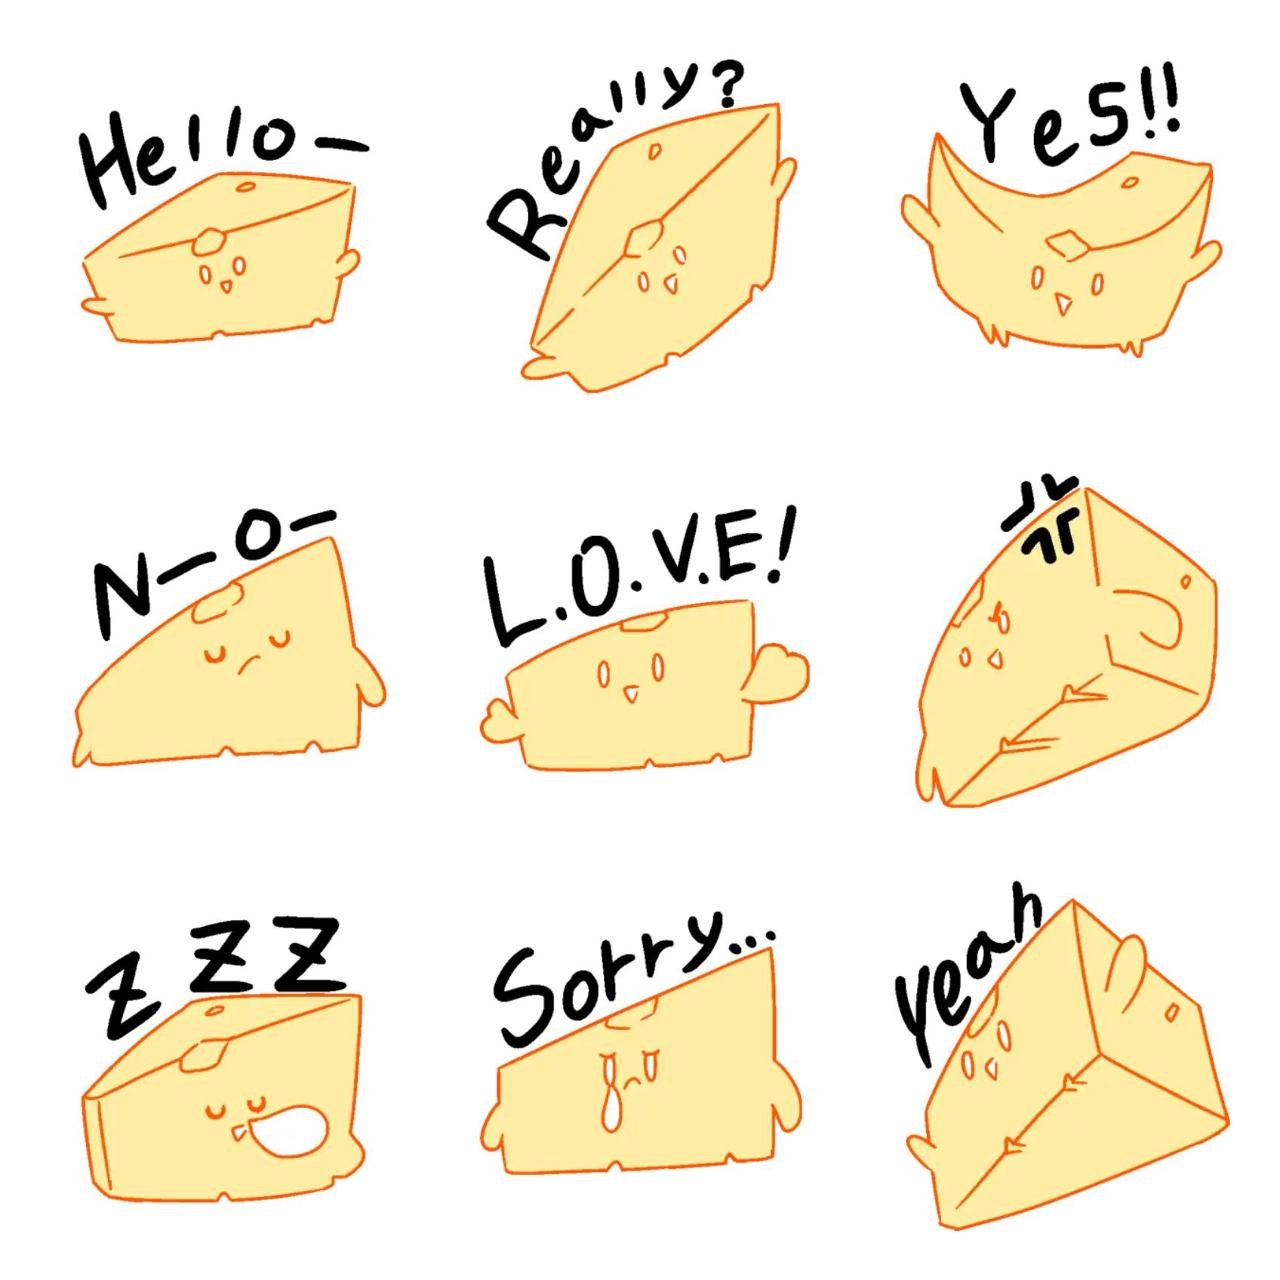 Yellow cheese! Animation/Cartoon,Food/Drink sticker pack for Whatsapp, Telegram, Signal, and others chatting and message apps